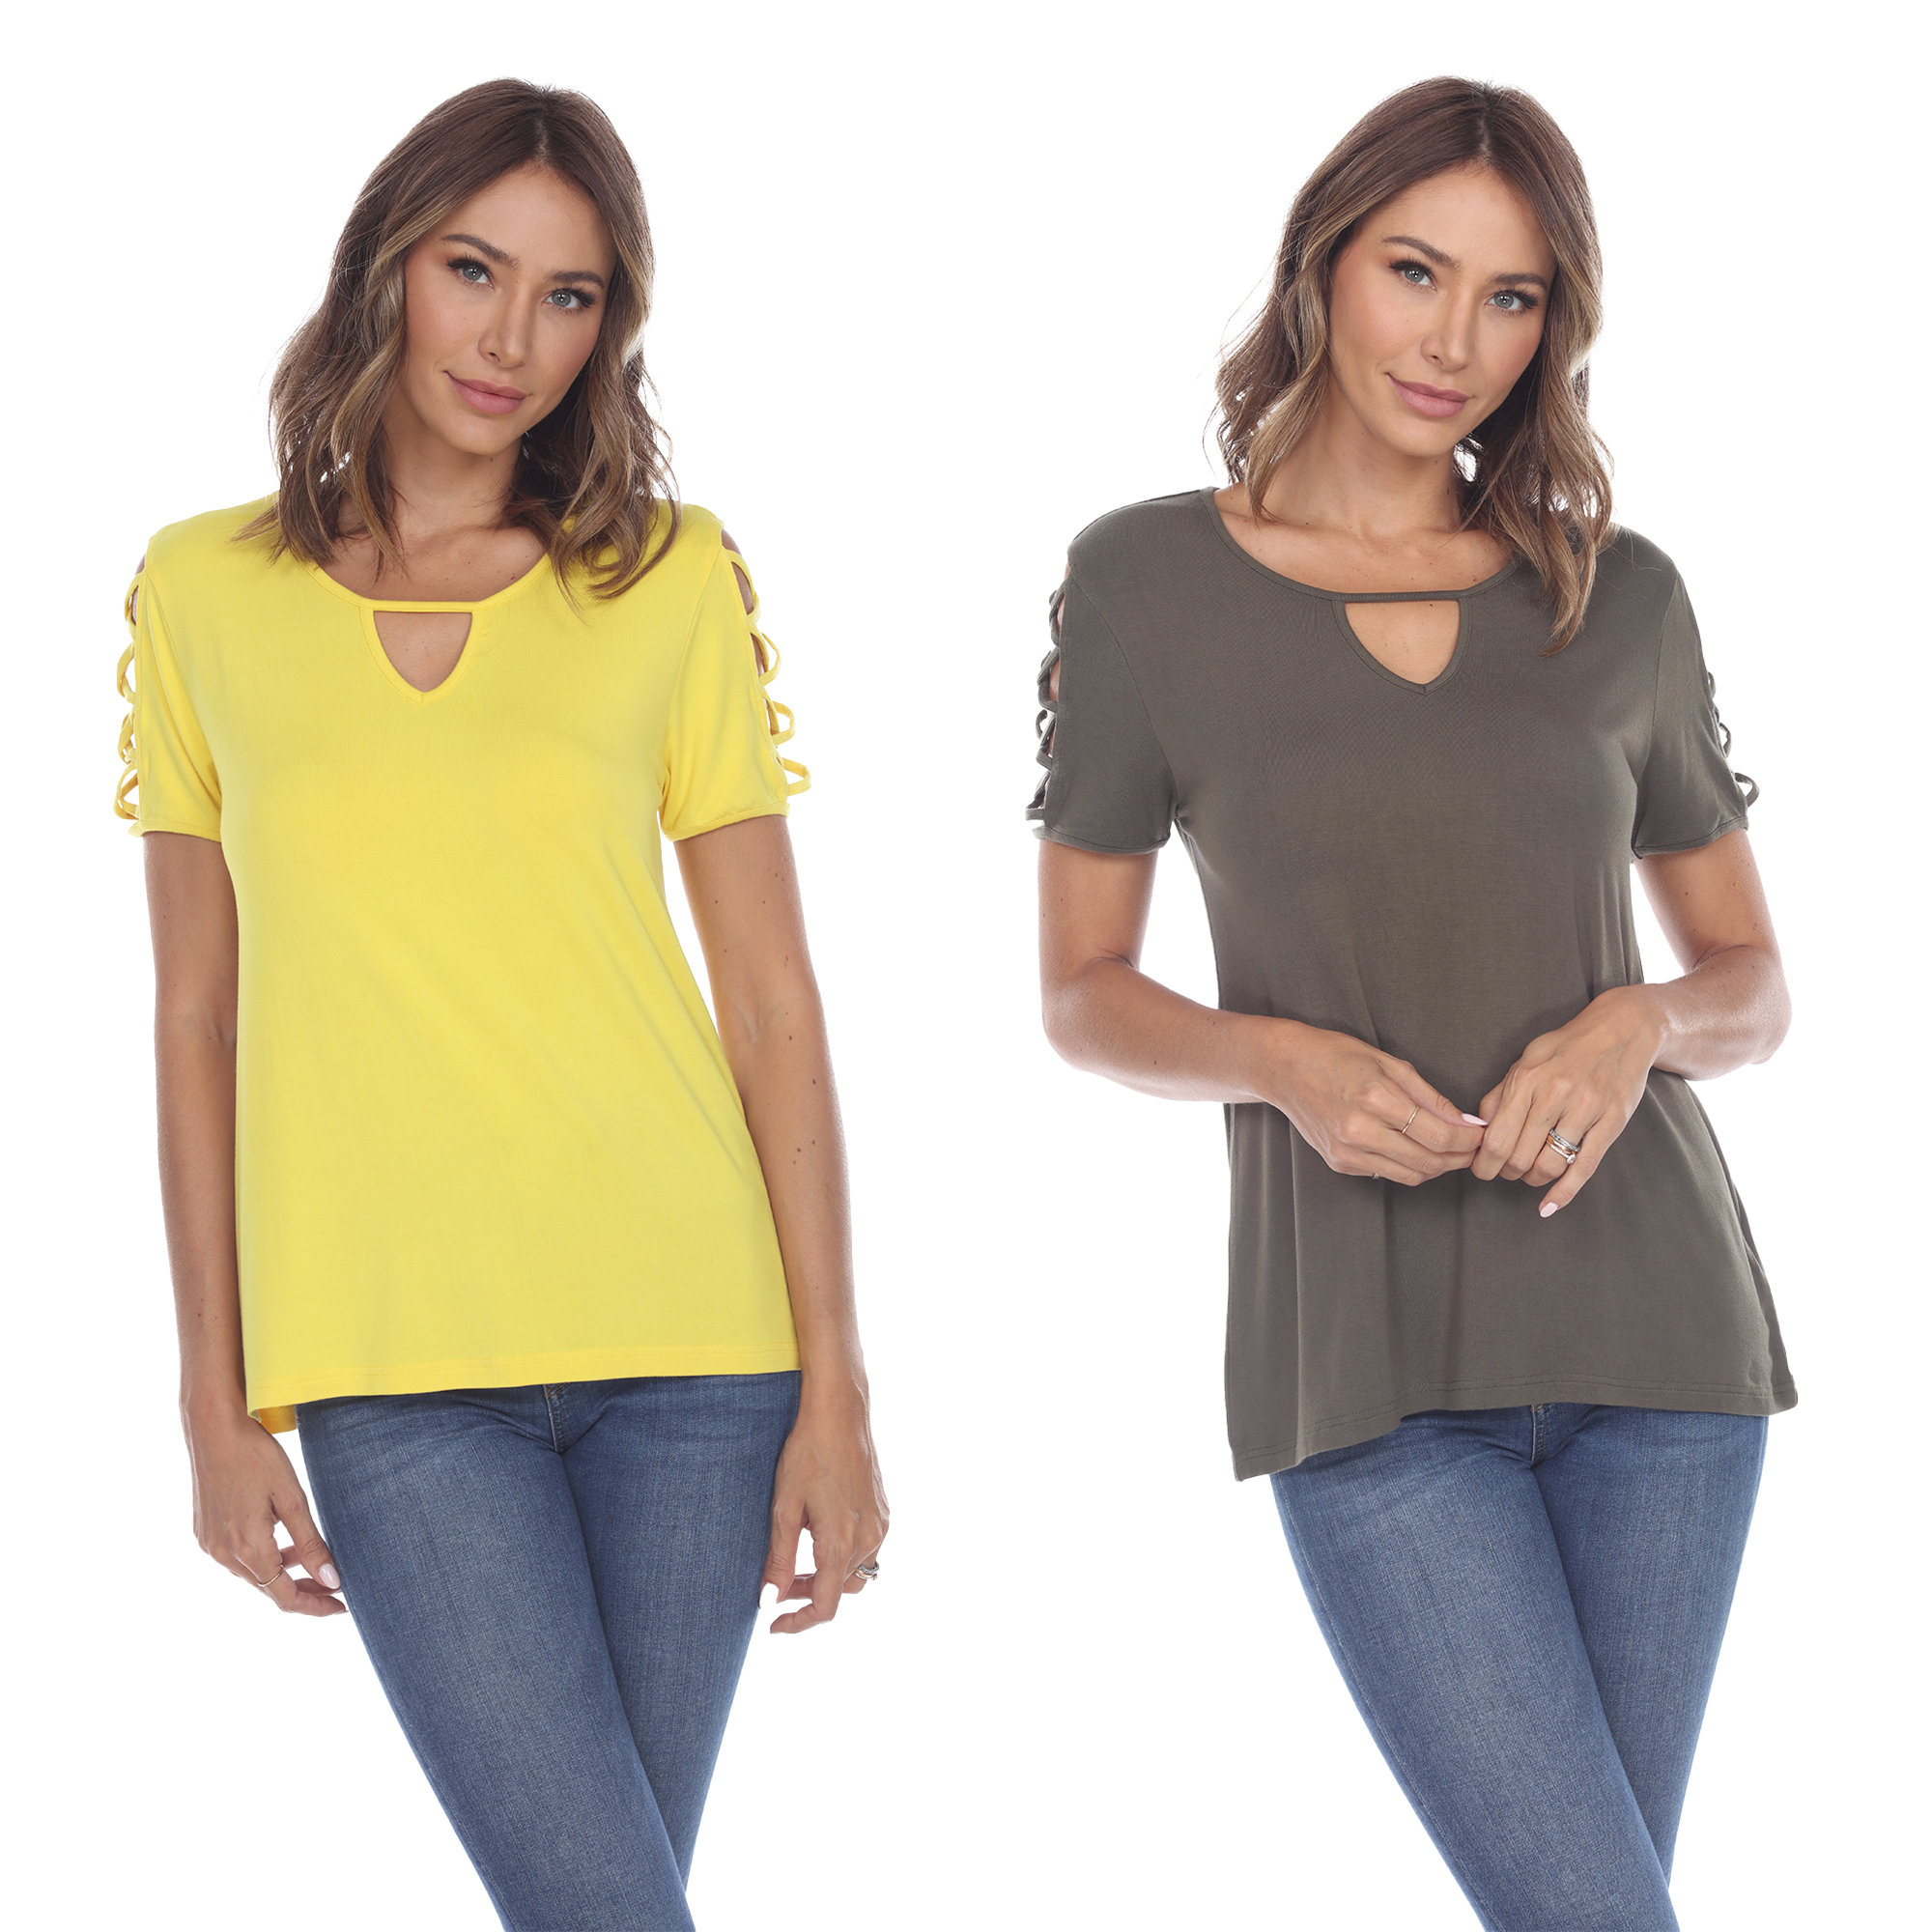 White Mark Women's Pack Of 2 Yellow Keyhole Neck Short Sleeve Top - Yellow Navy, Small